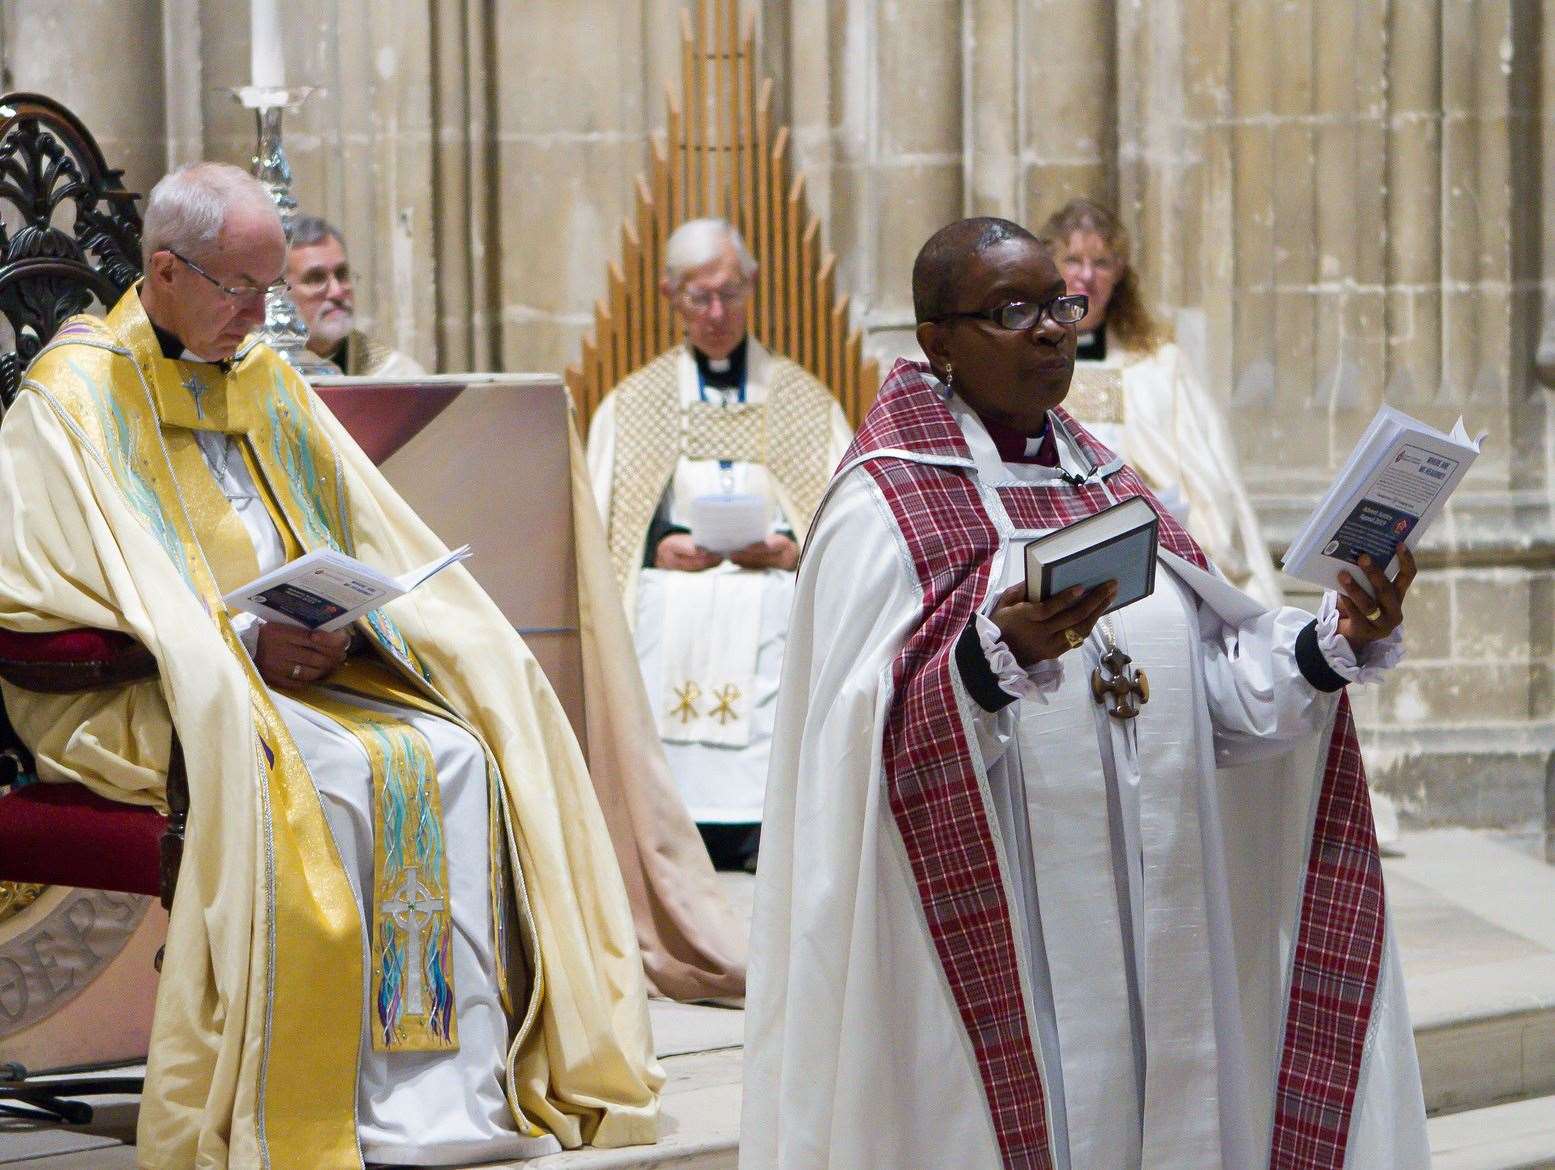 The Bishop was consecrated on November 30